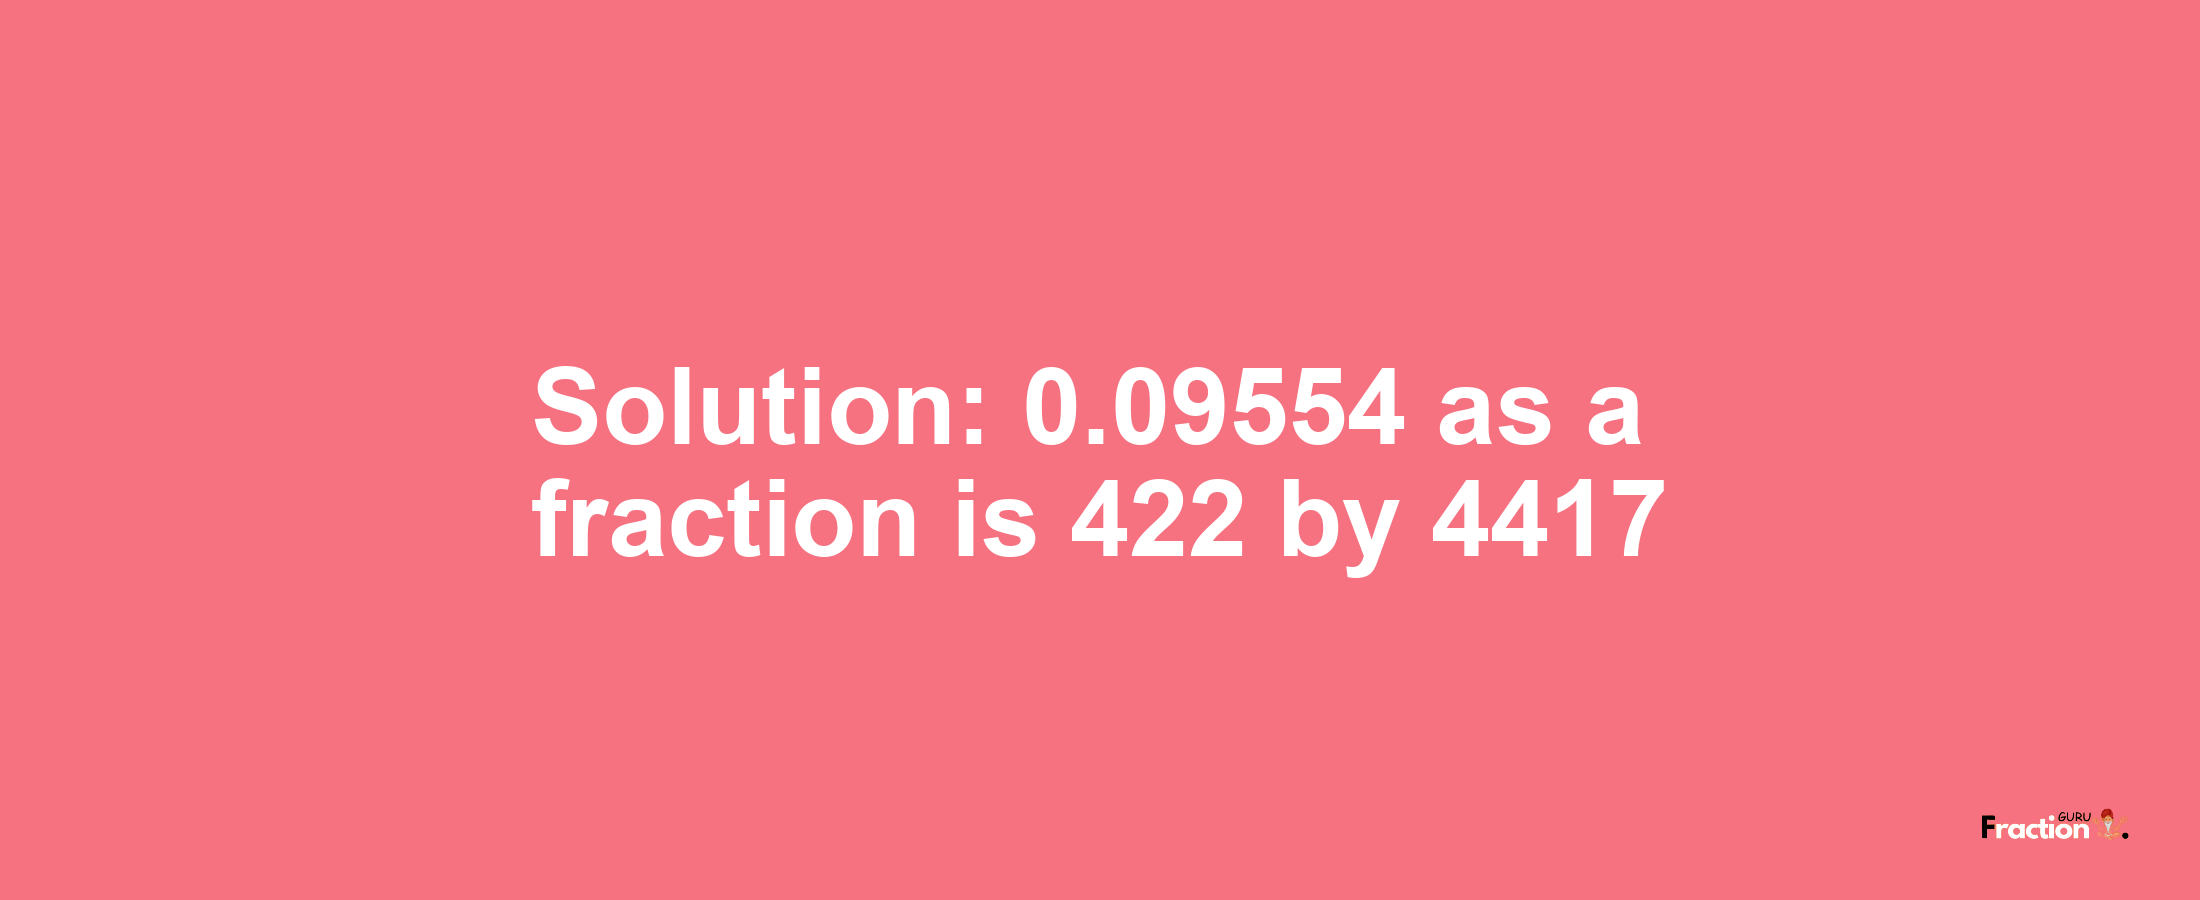 Solution:0.09554 as a fraction is 422/4417